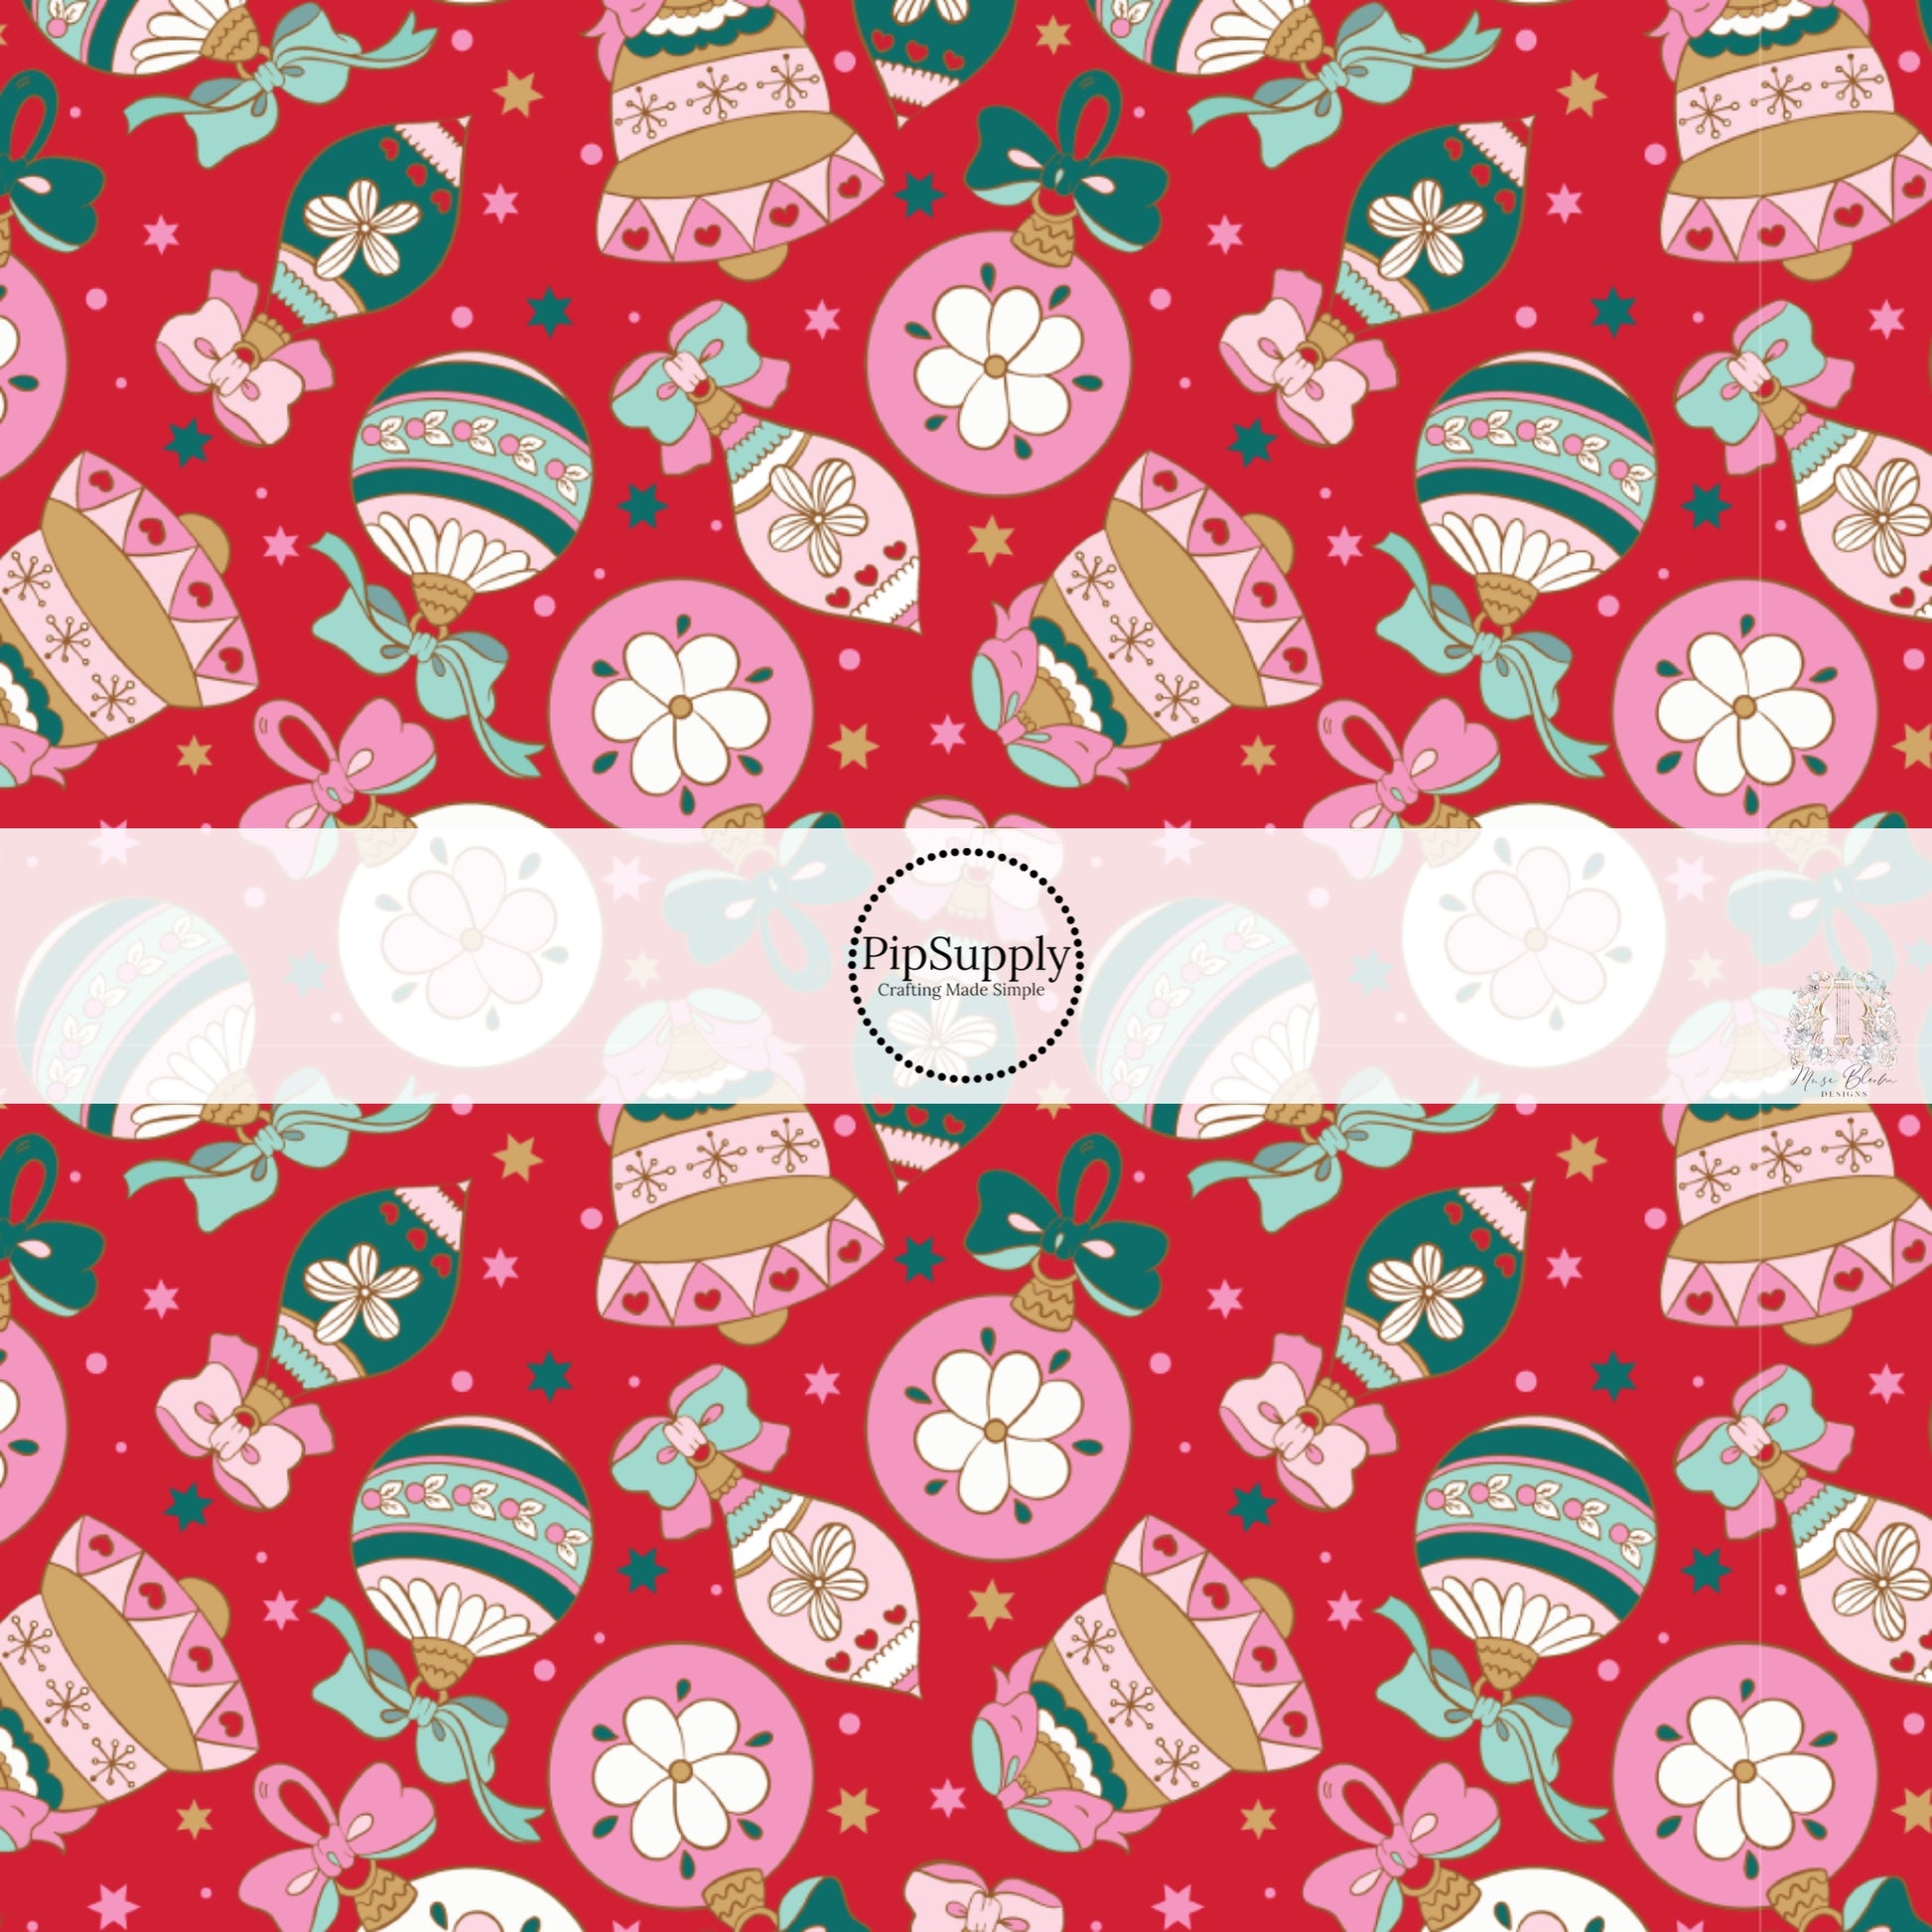 Pink, green, and gold vintage ornaments on red hair bow strips